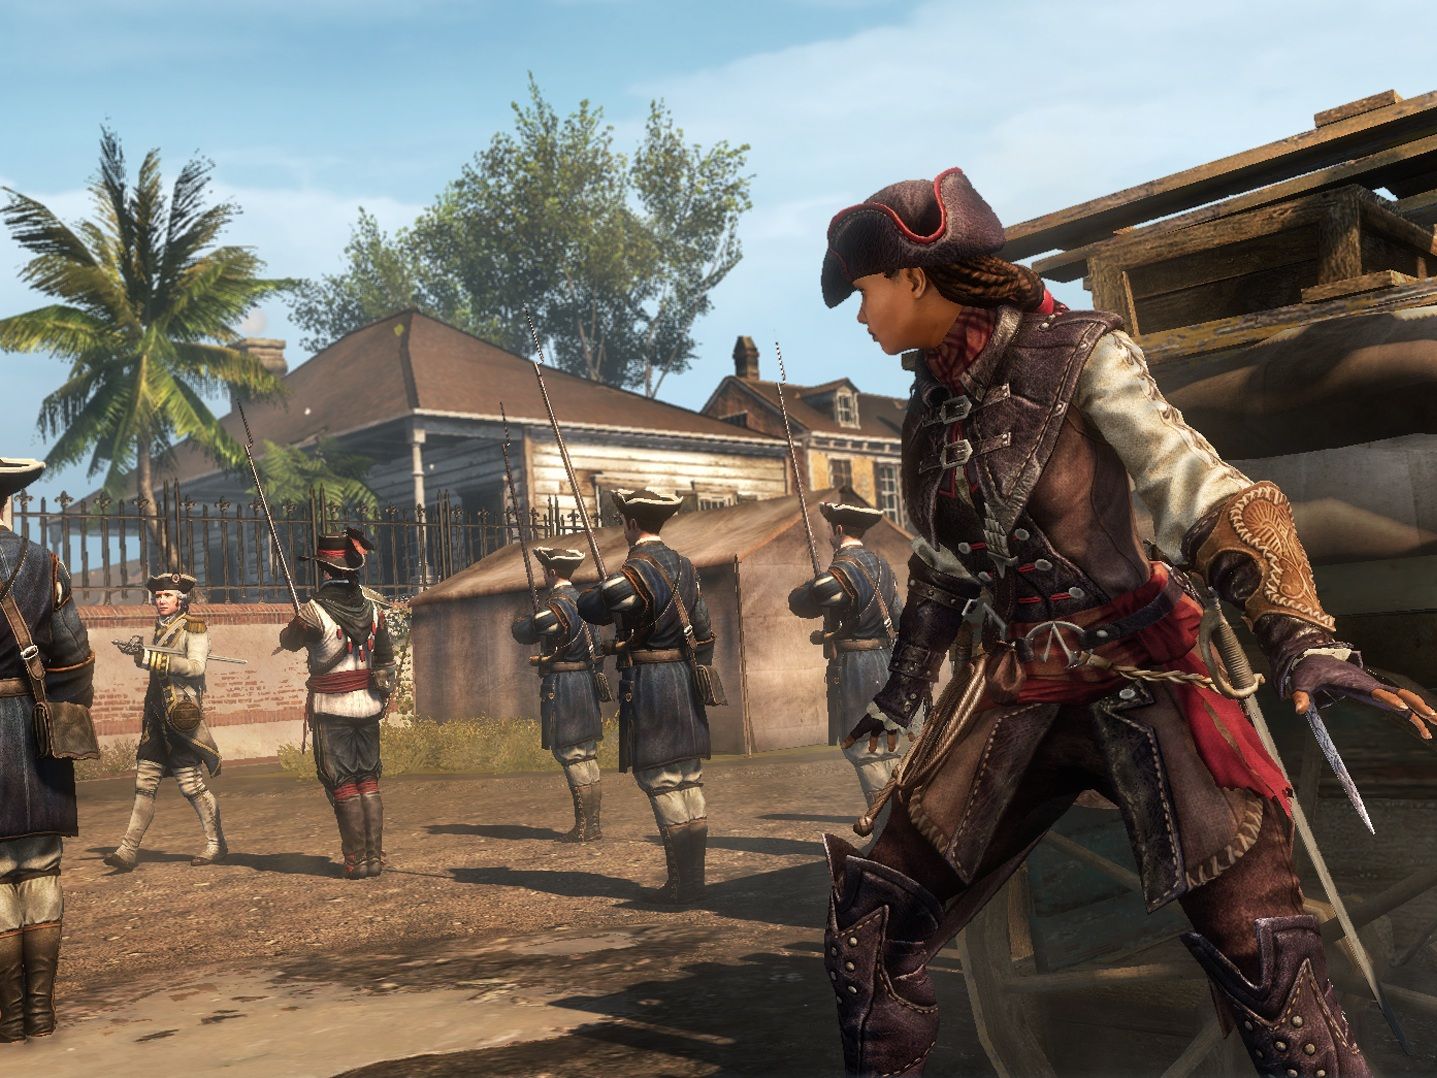 Assassin's Creed 3 review – will Ubisoft ever top it?